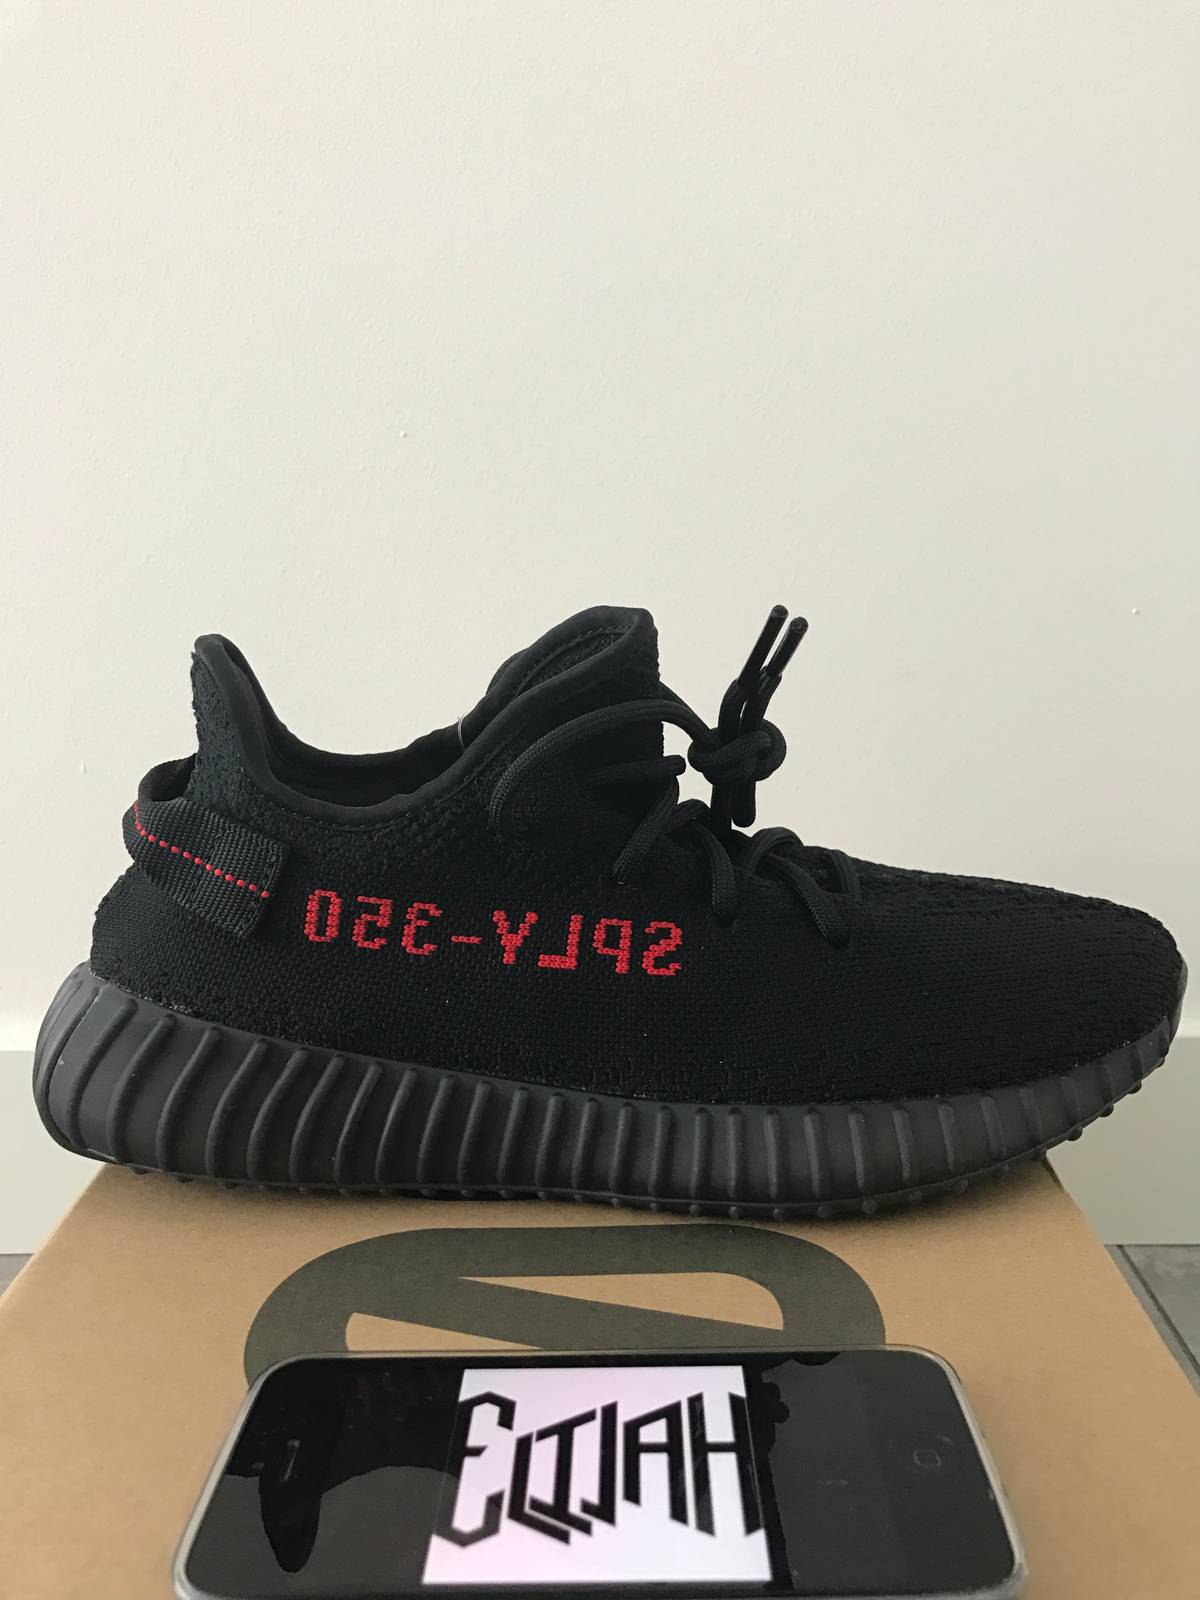 Buy 6th Real Boost Yeezy 350 Boost V2 Bred SPLY 350 Black Red at 